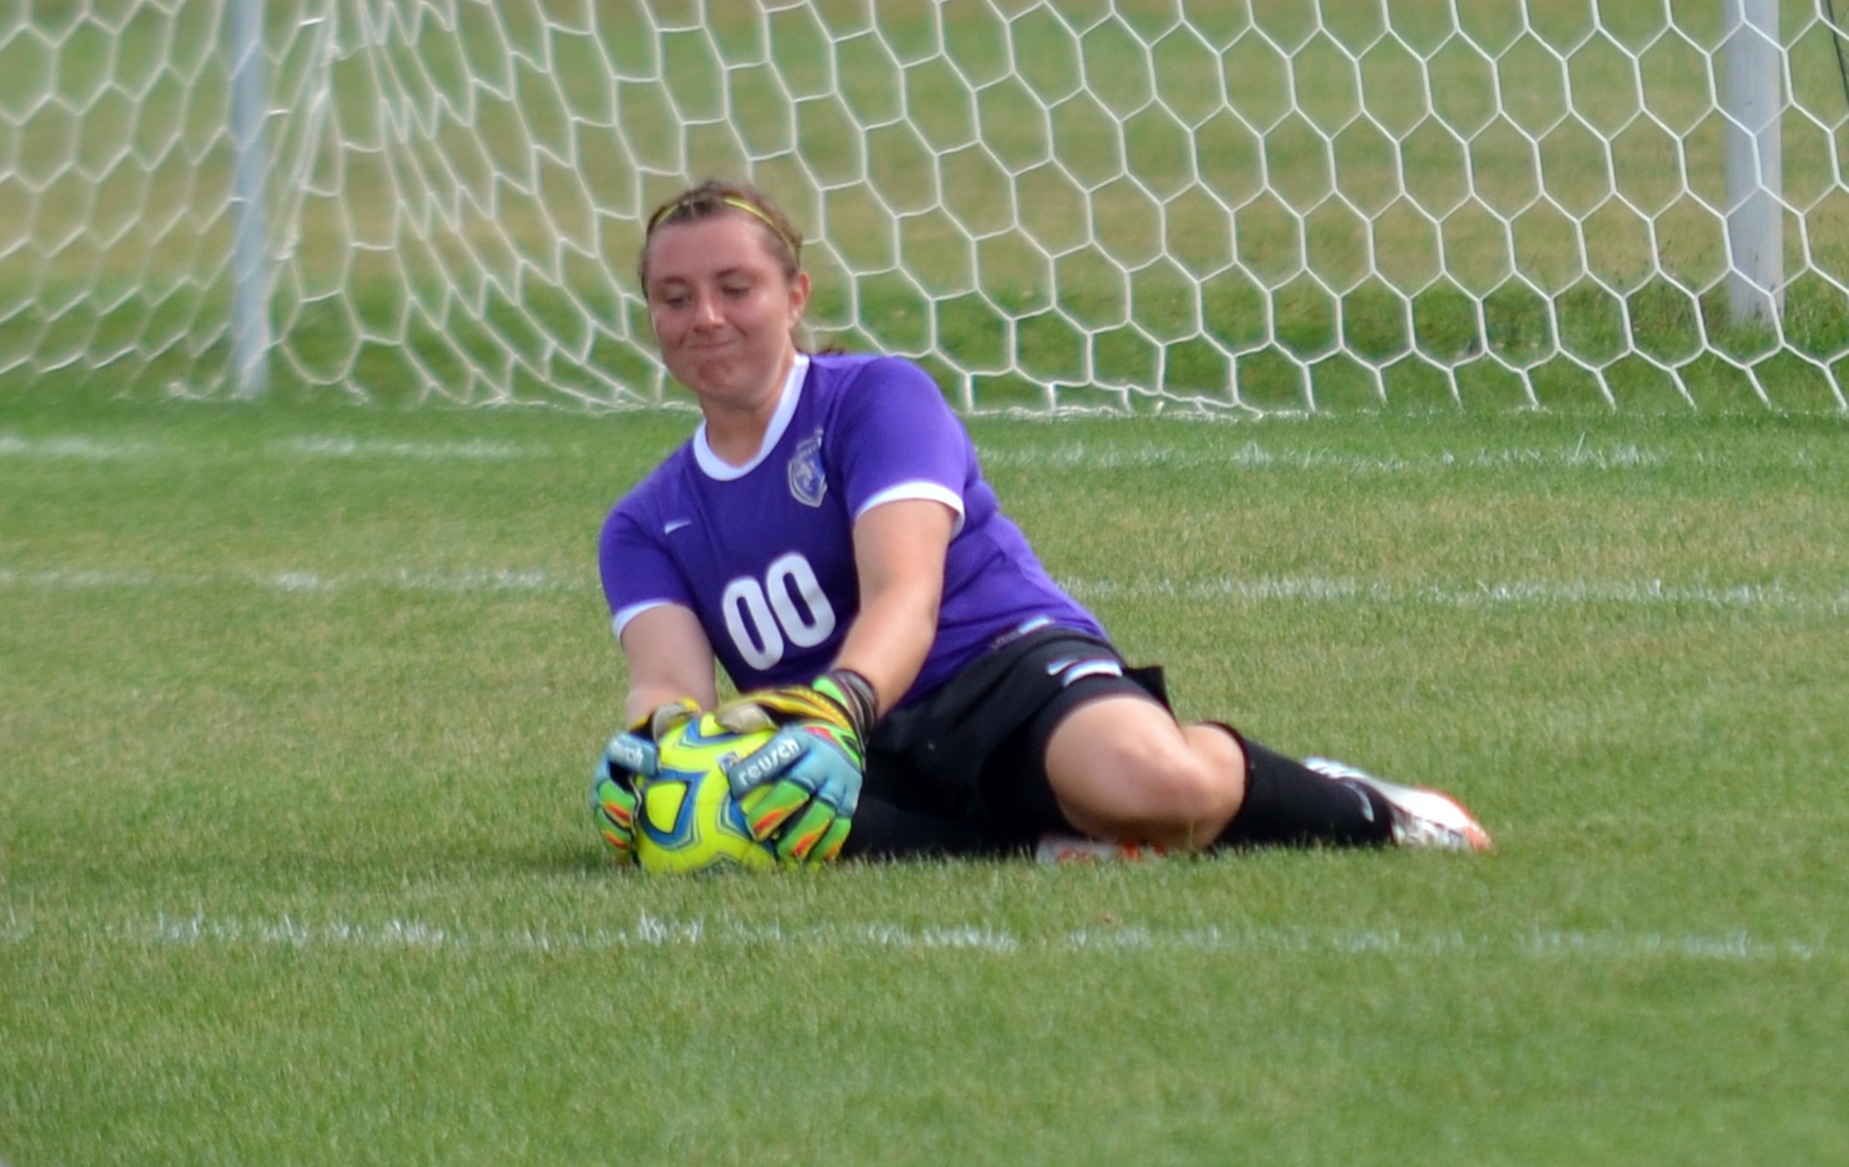 Goalkeeper Claire Turner Wins HCAC Player of the Week